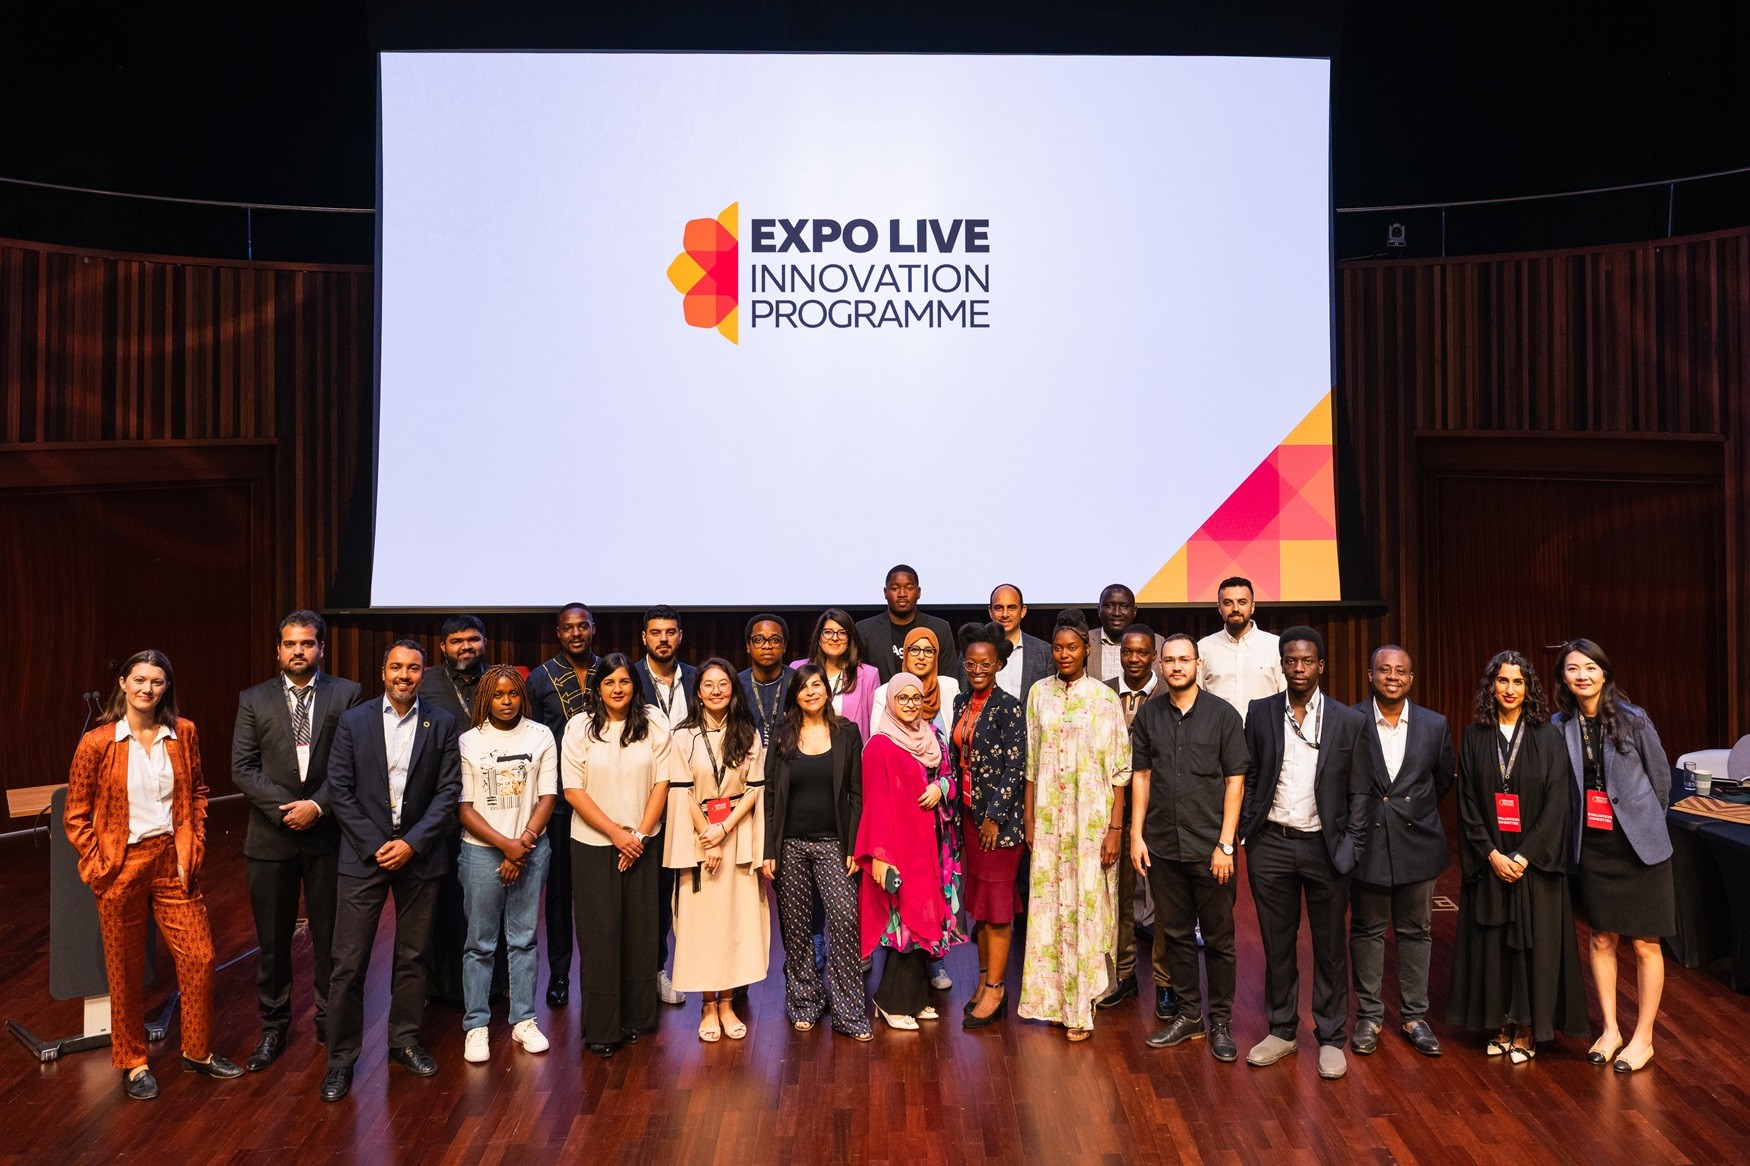 Photo: Solving global challenges together: Expo Live selects 16 entrepreneurs from across the world to receive grants, guidance and support